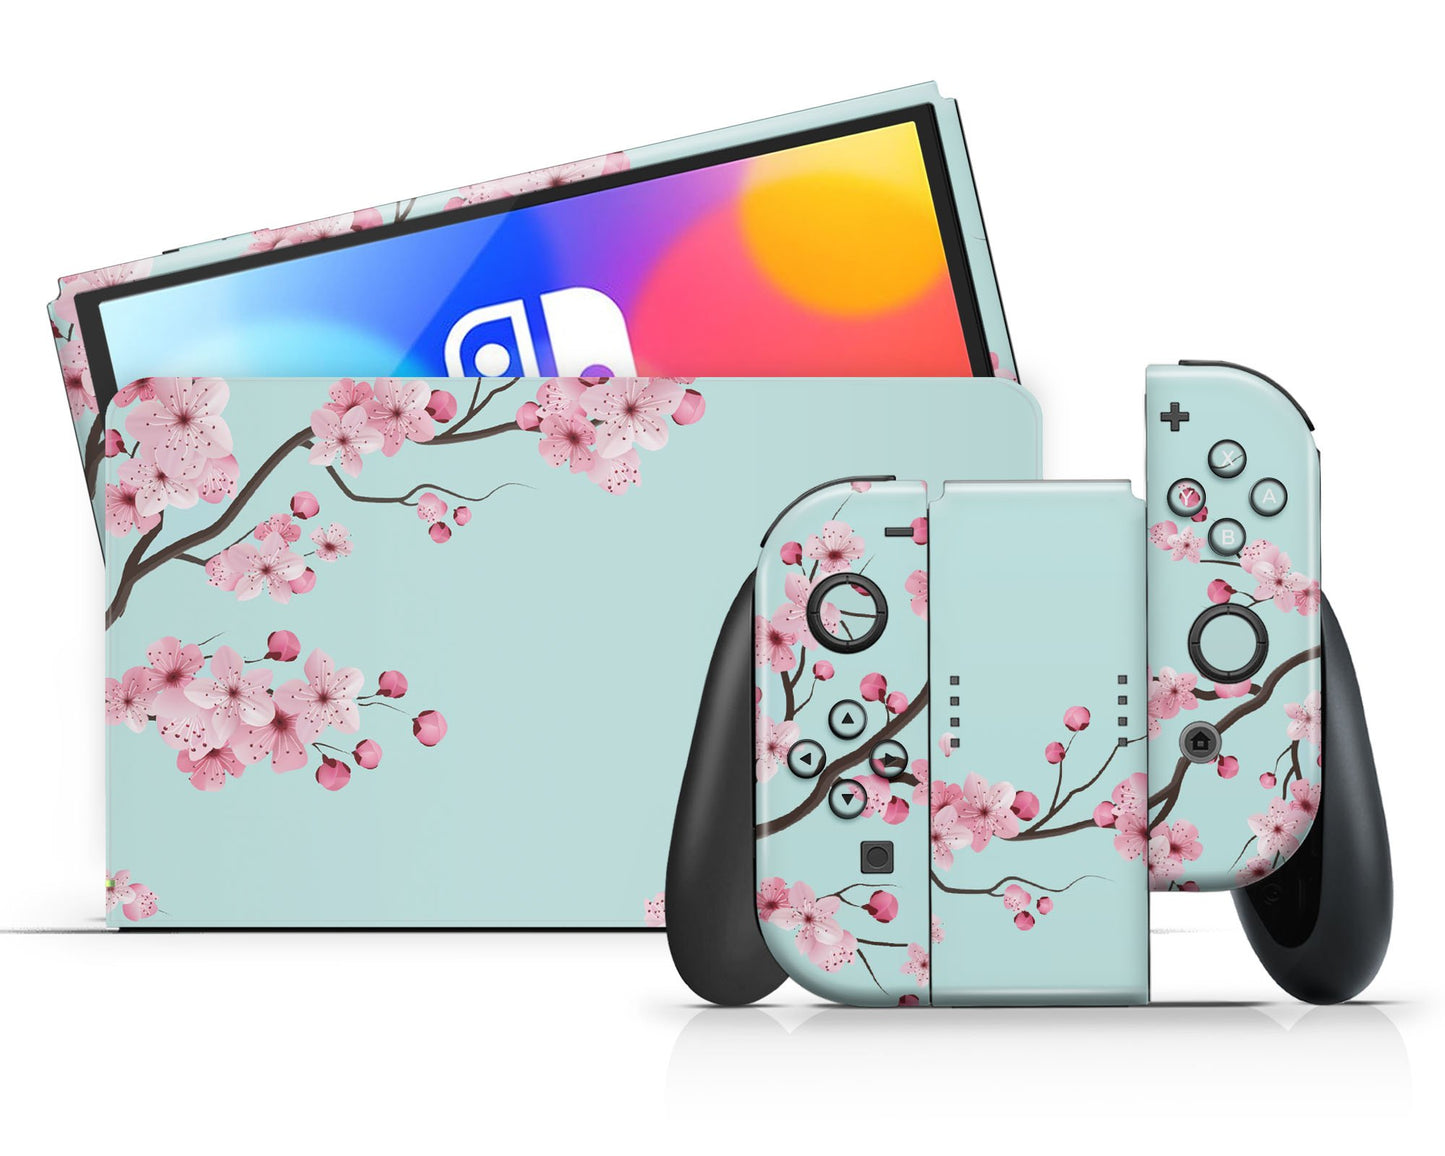 Lux Skins Nintendo Switch OLED Cherry Blossom Teal Mint Classic no logo Skins - Art Floral Skin